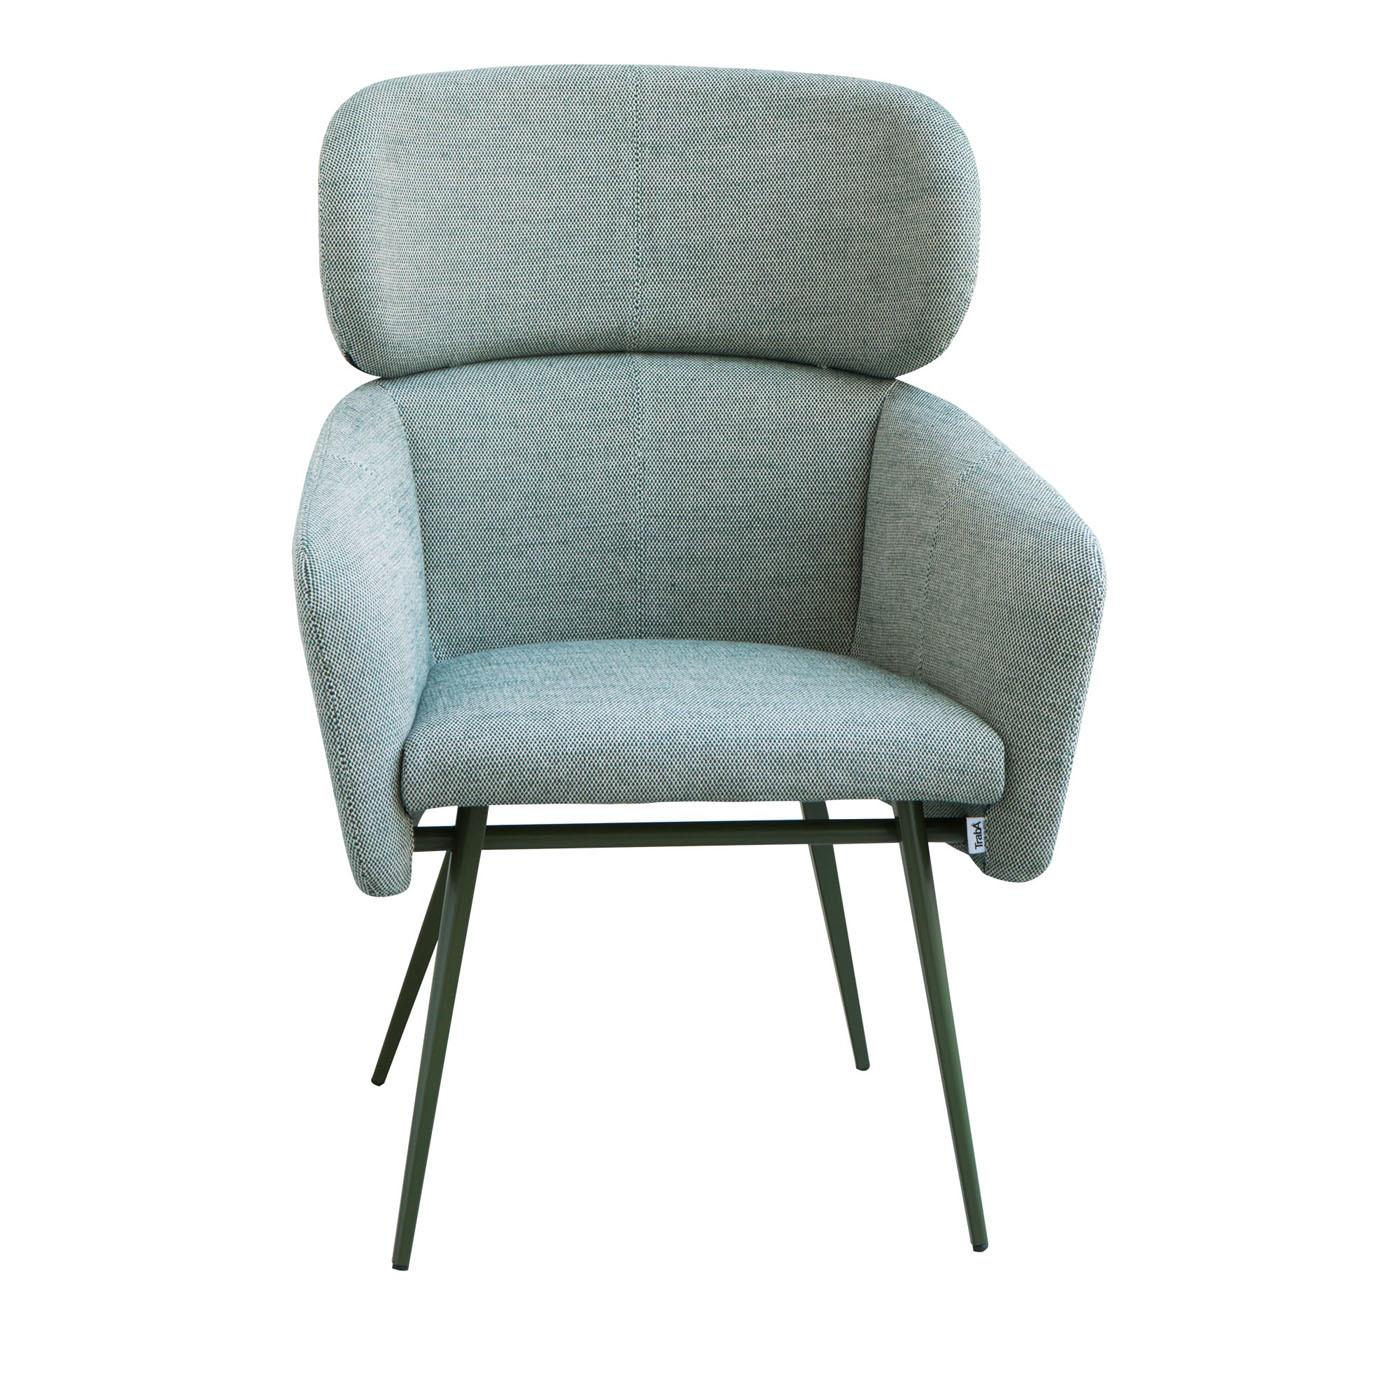 Italian Balù Extra Large Met Light Blue Chair by Emilio Nanni For Sale